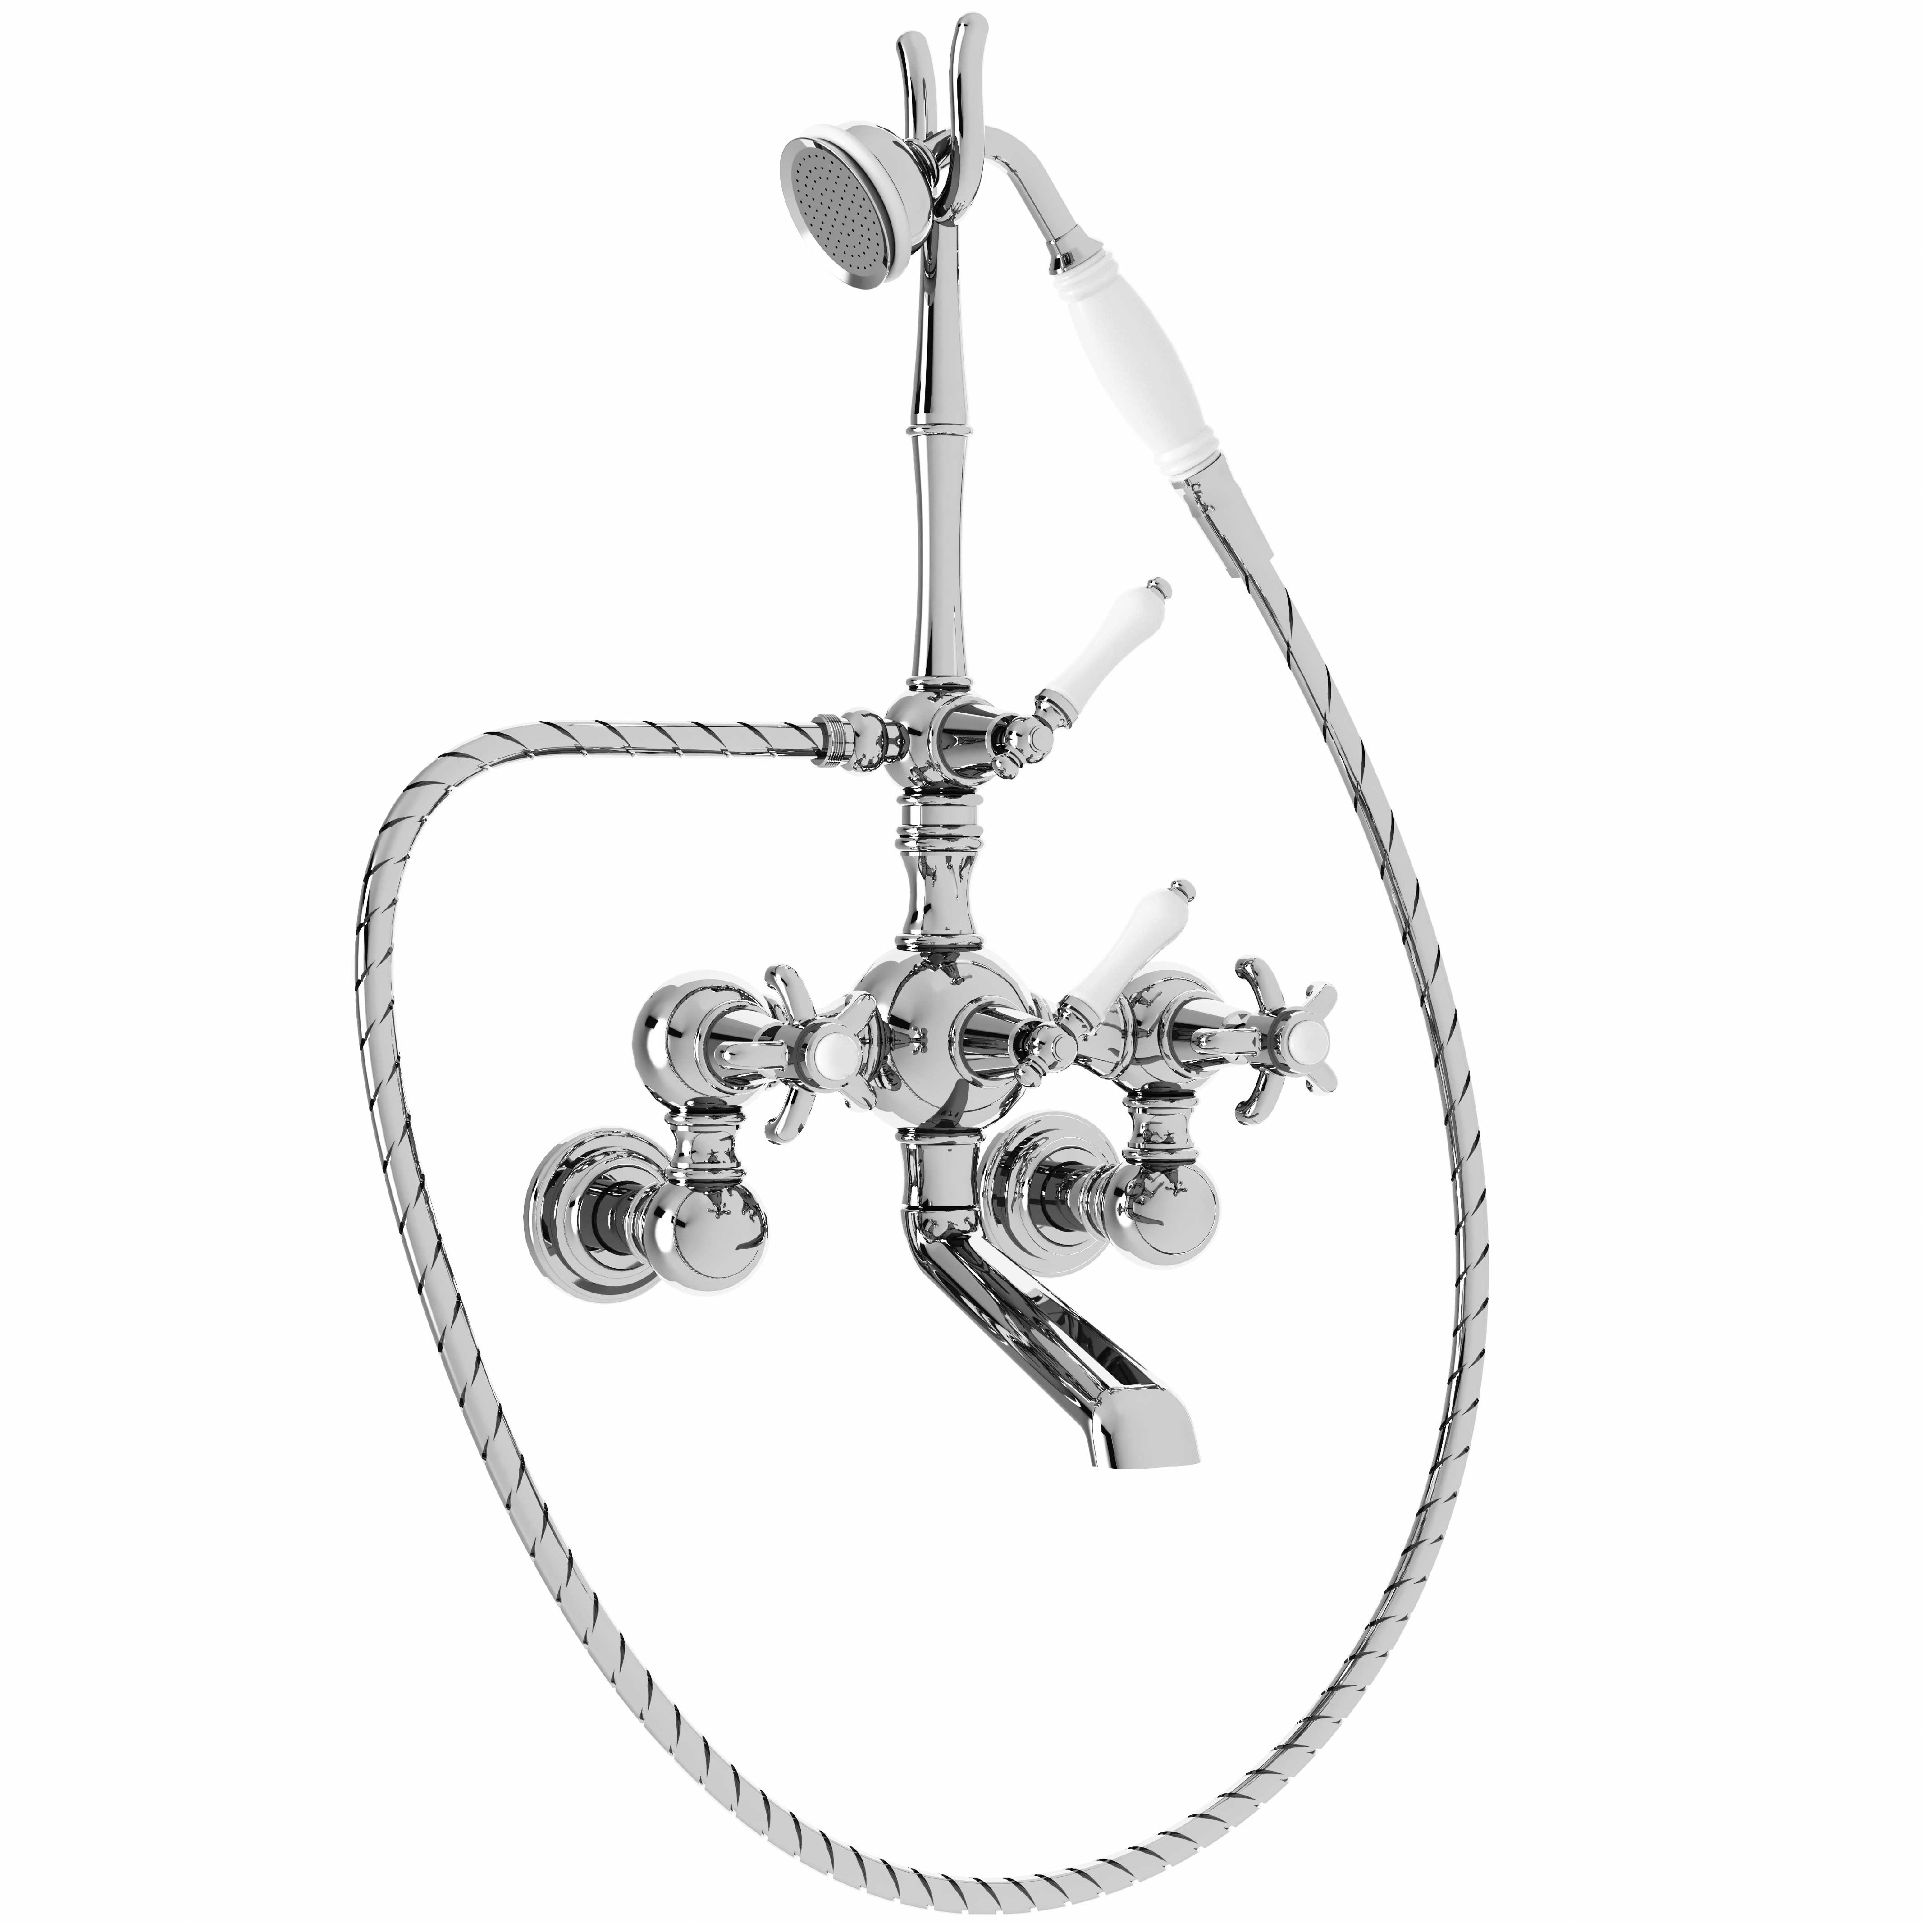 M01-3201 Wall mounted bath and shower mixer